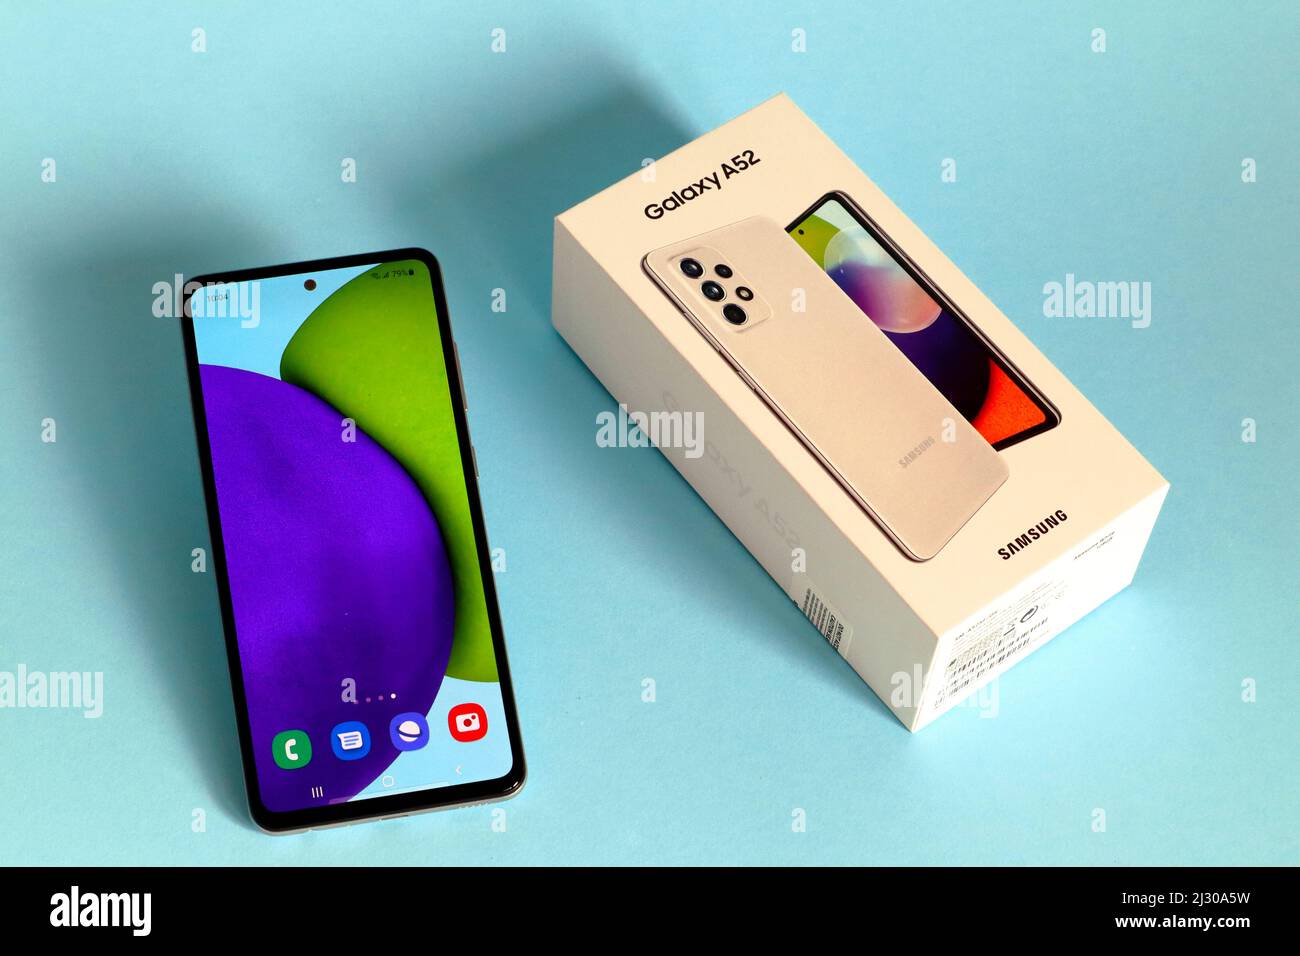 Smartphone Samsung Galaxy A52 released in march 2021 made in India. Samsung Electronics Co. Ltd. South Korea Stock Photo